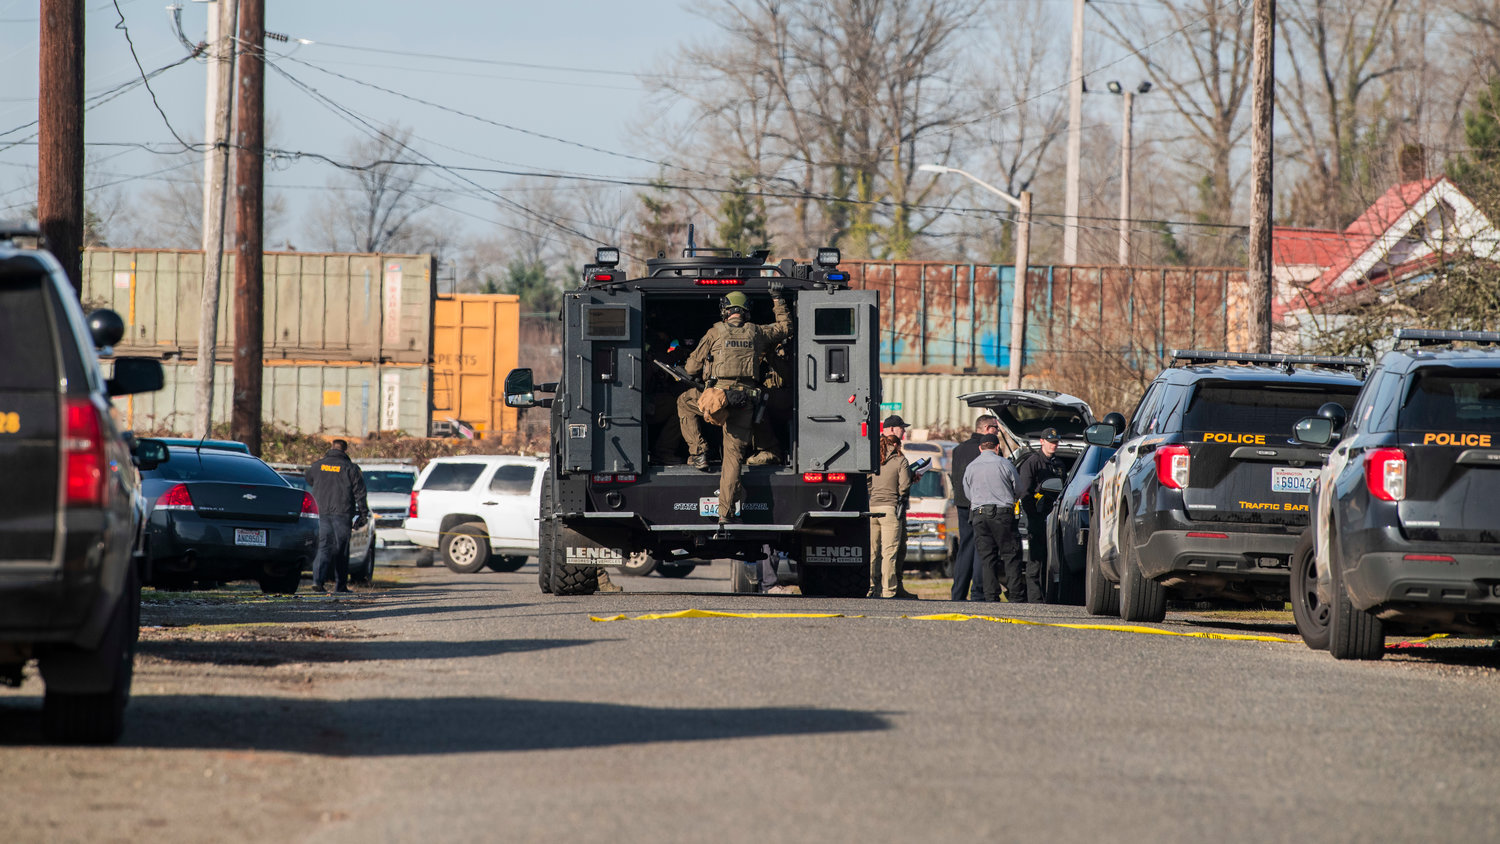 S.W.A.T teams respond to an active scene in the 1300 block of Windsor Avenue in Centralia on Thursday.